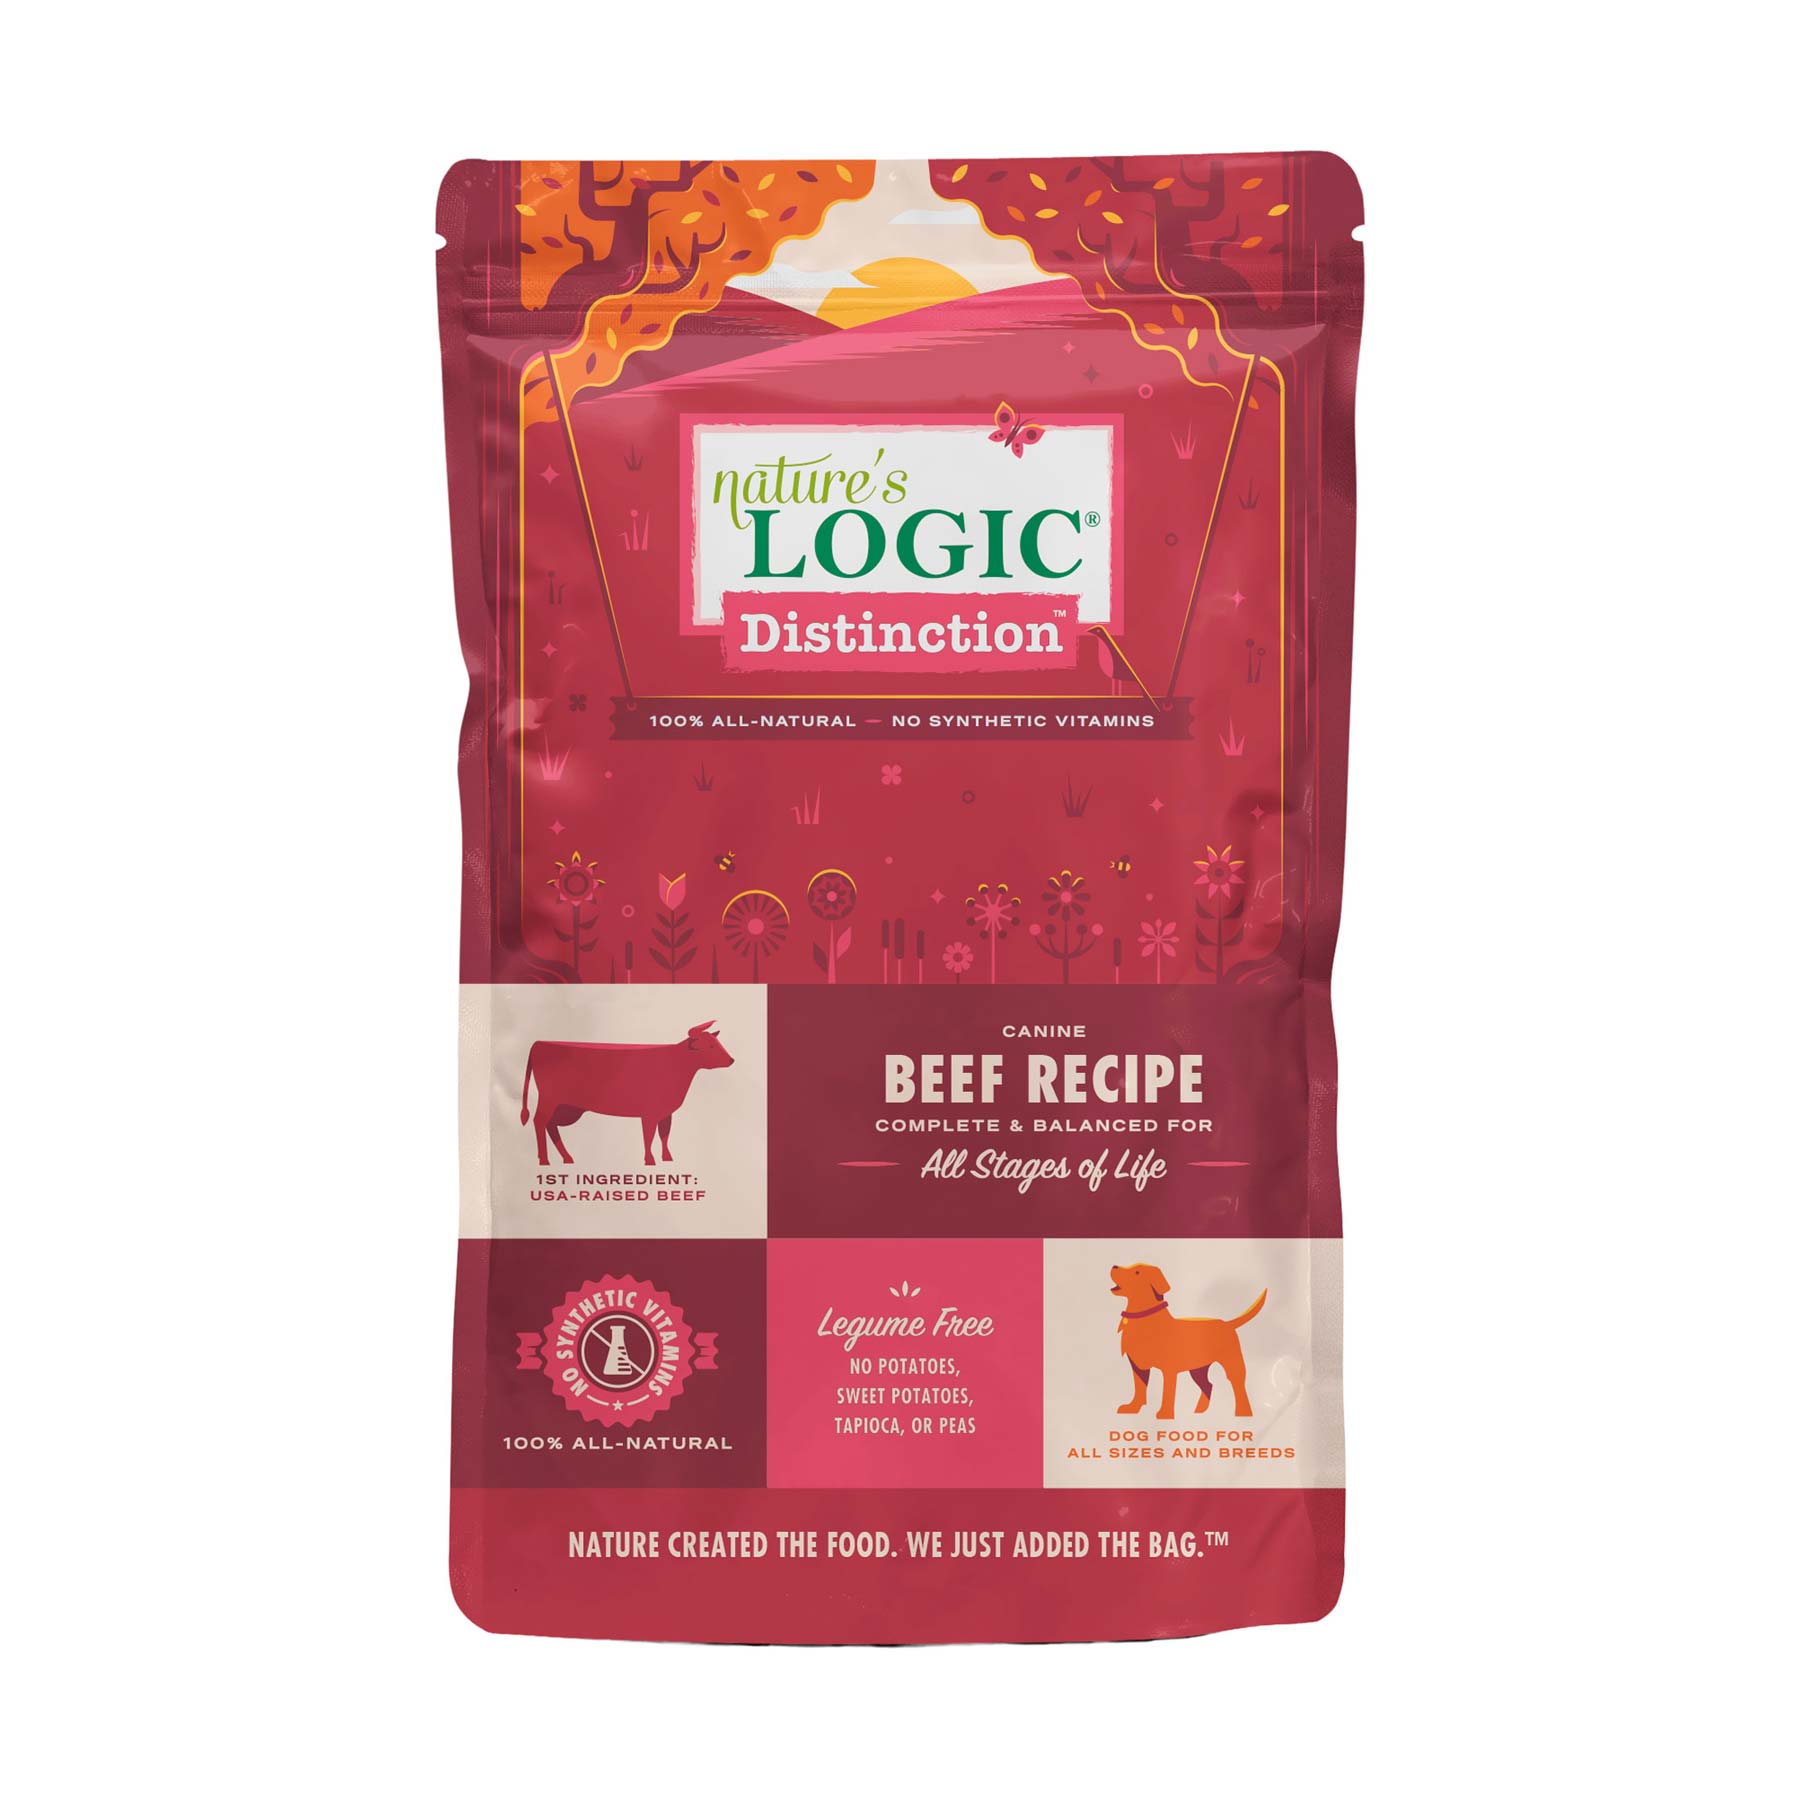 Nature's Logic Distinction Dry Dog Food, Canine Beef Recipe, 24 Pounds